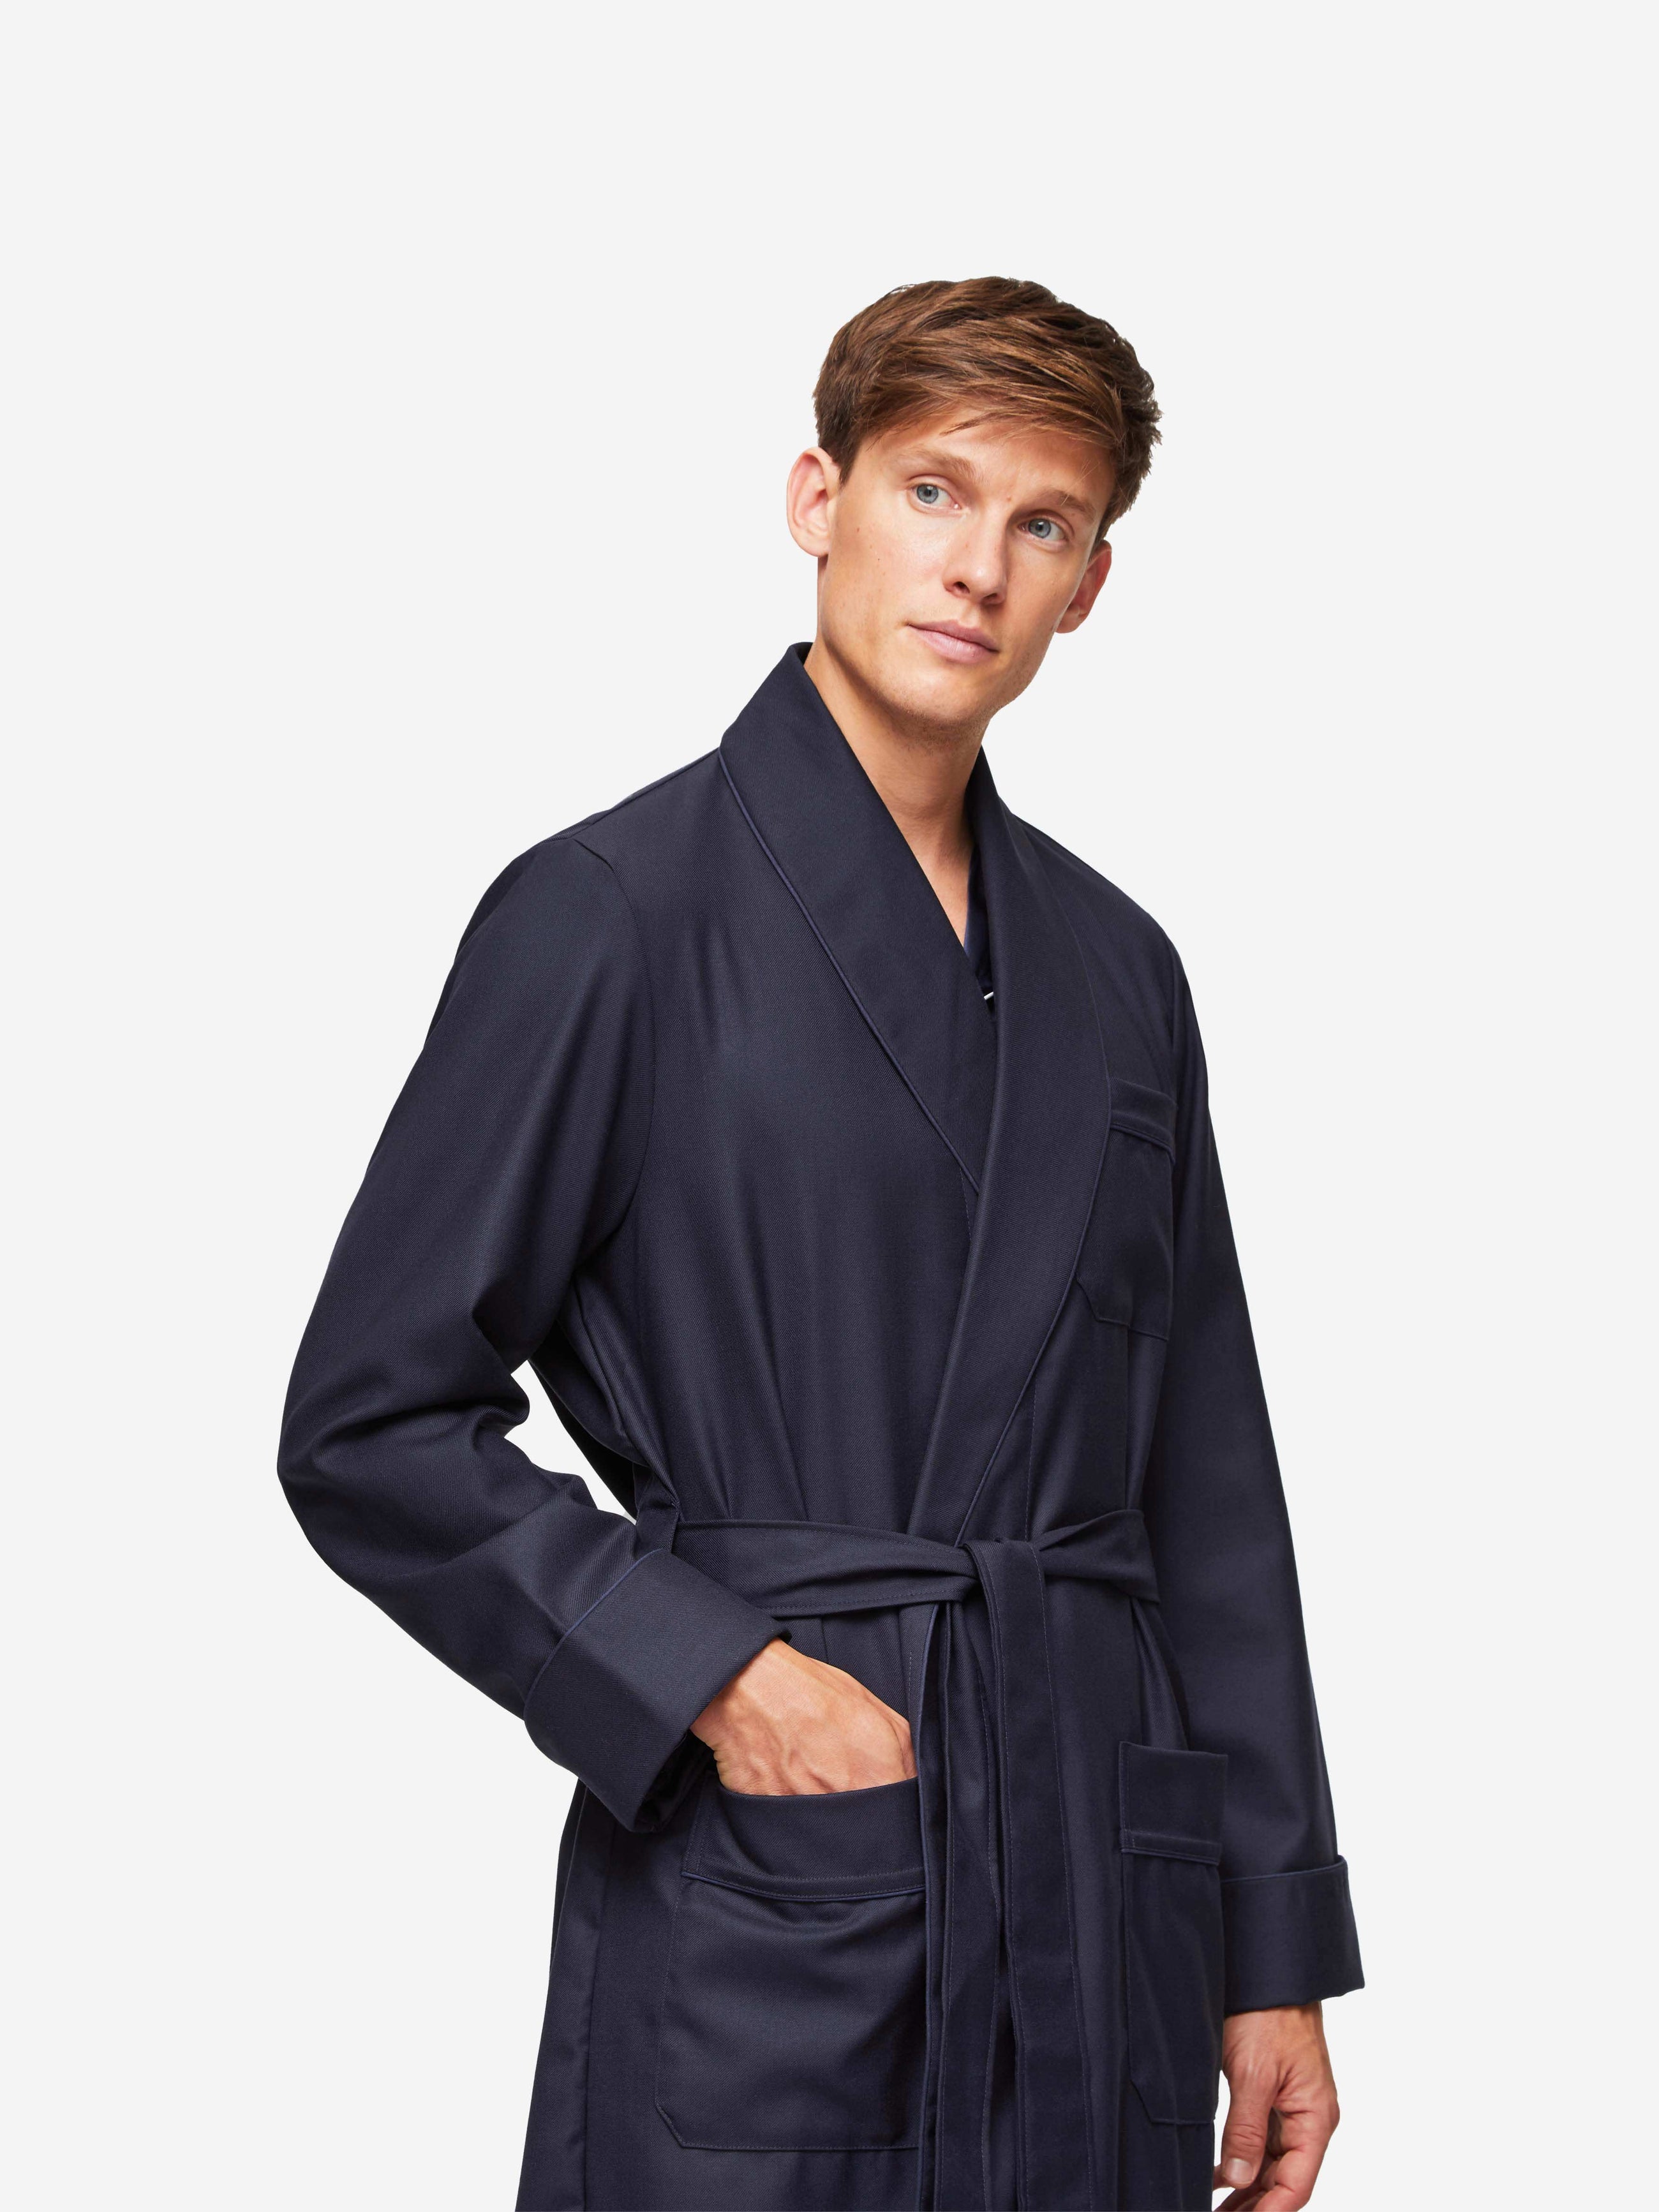 Night Life: 12 New Sleep Time Sewing Patterns | Dressing gown pattern, Mens  dressing gown, Burda style